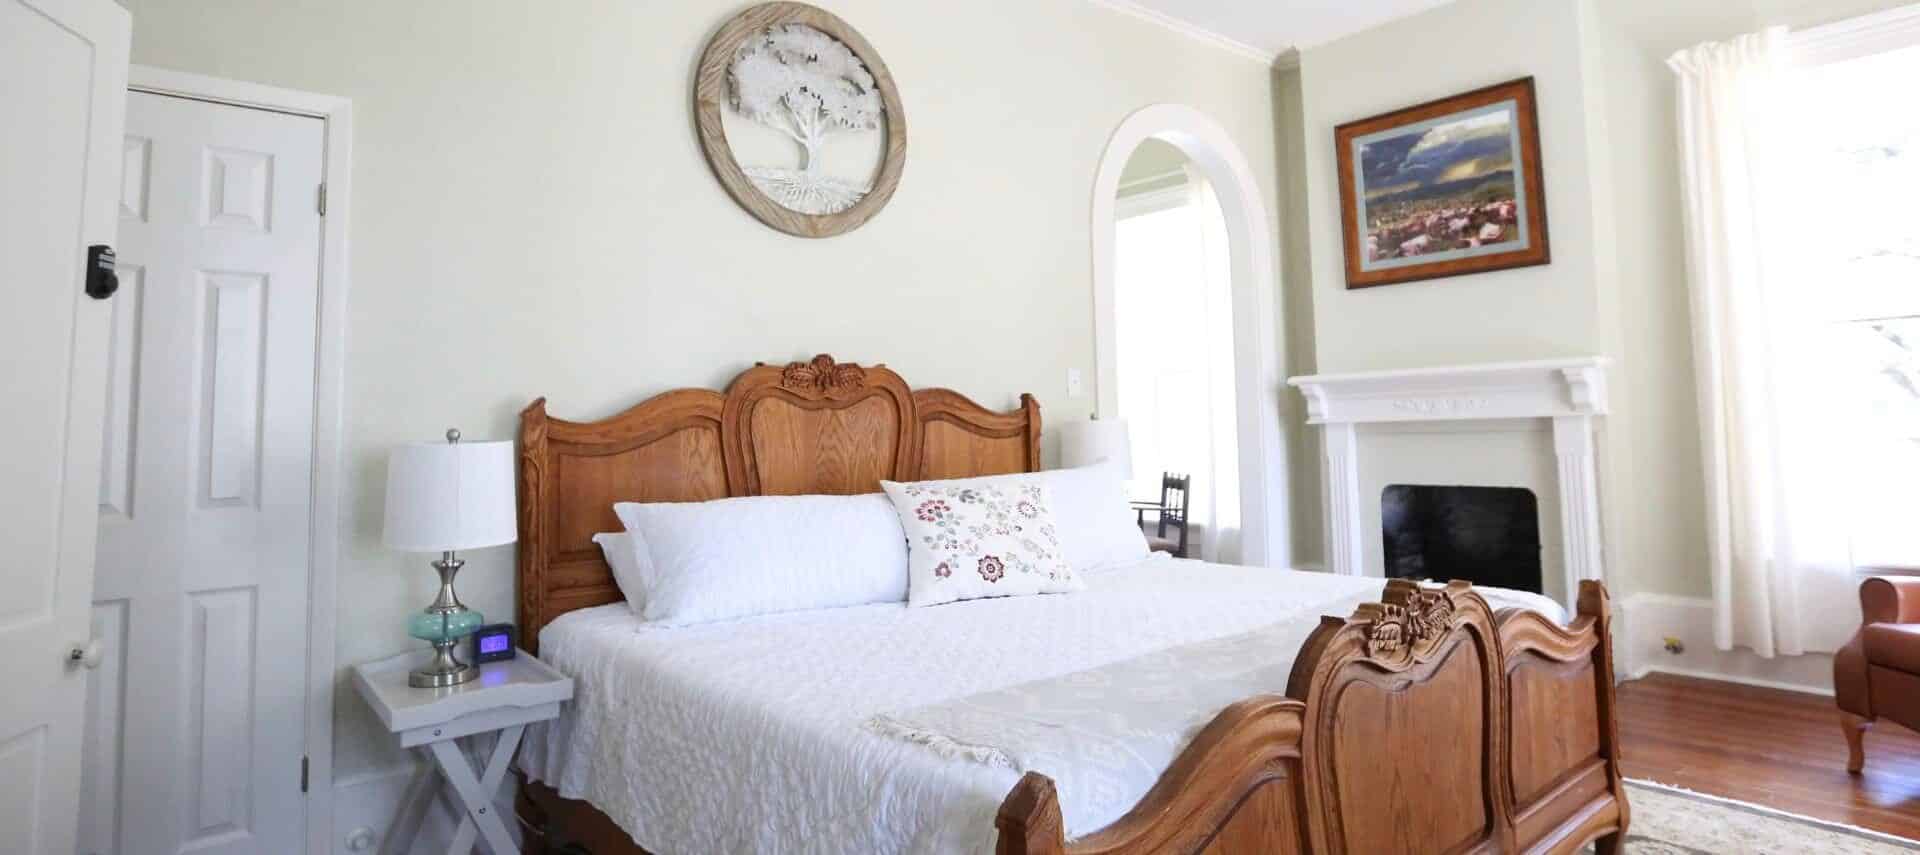 bedroom with light green walls, white doors and trim, wood floors, a bed with a carved wood headboard and footboards, white bedding, side tables with lamps, a fireplace with white mantle, and a carved circular oak tree on the wall